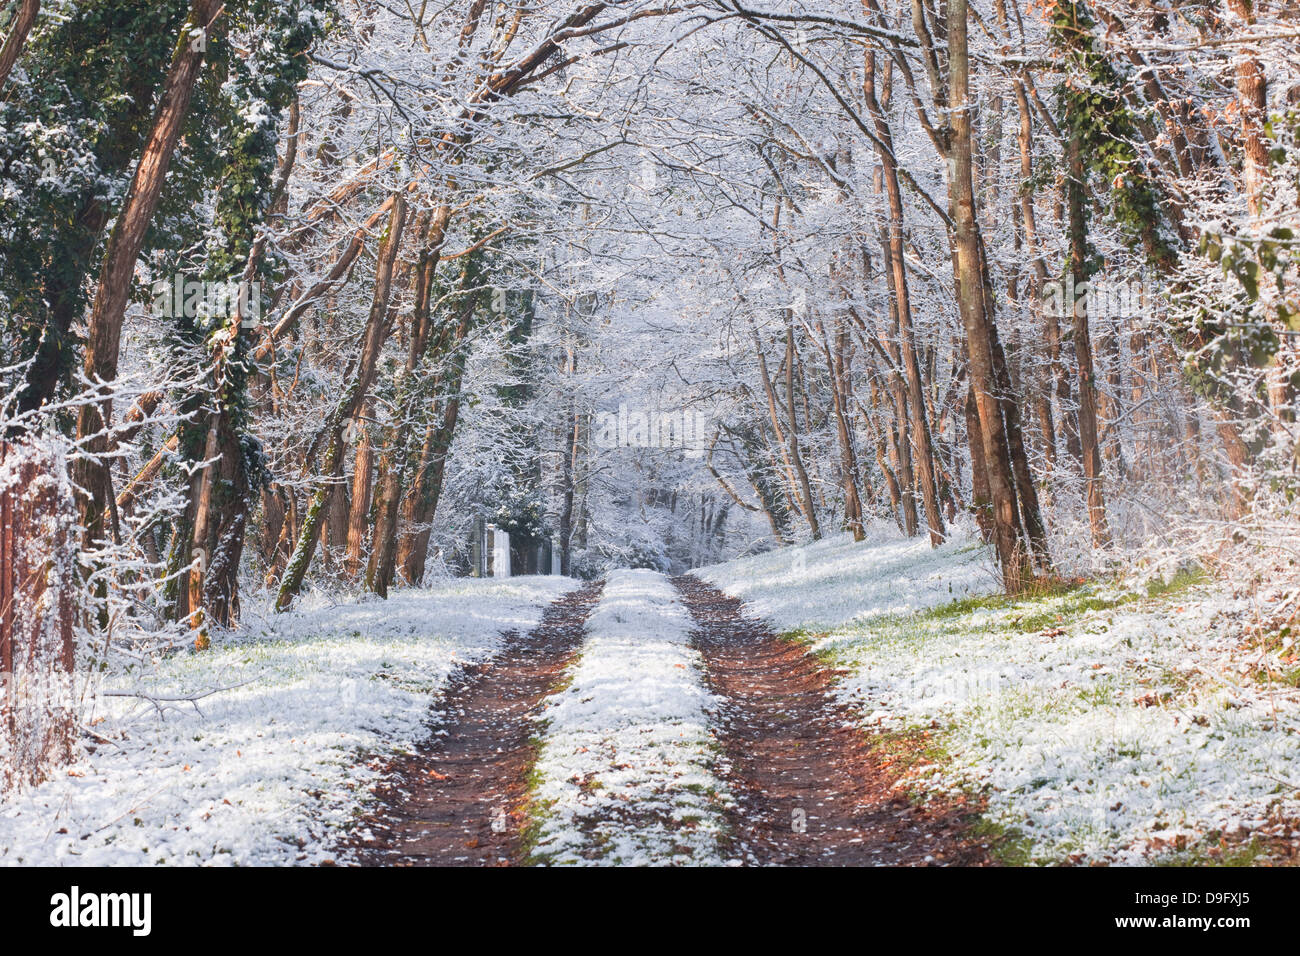 Snow covered trees in the Loire Valley area, Loir-et-Cher, Centre, France Stock Photo